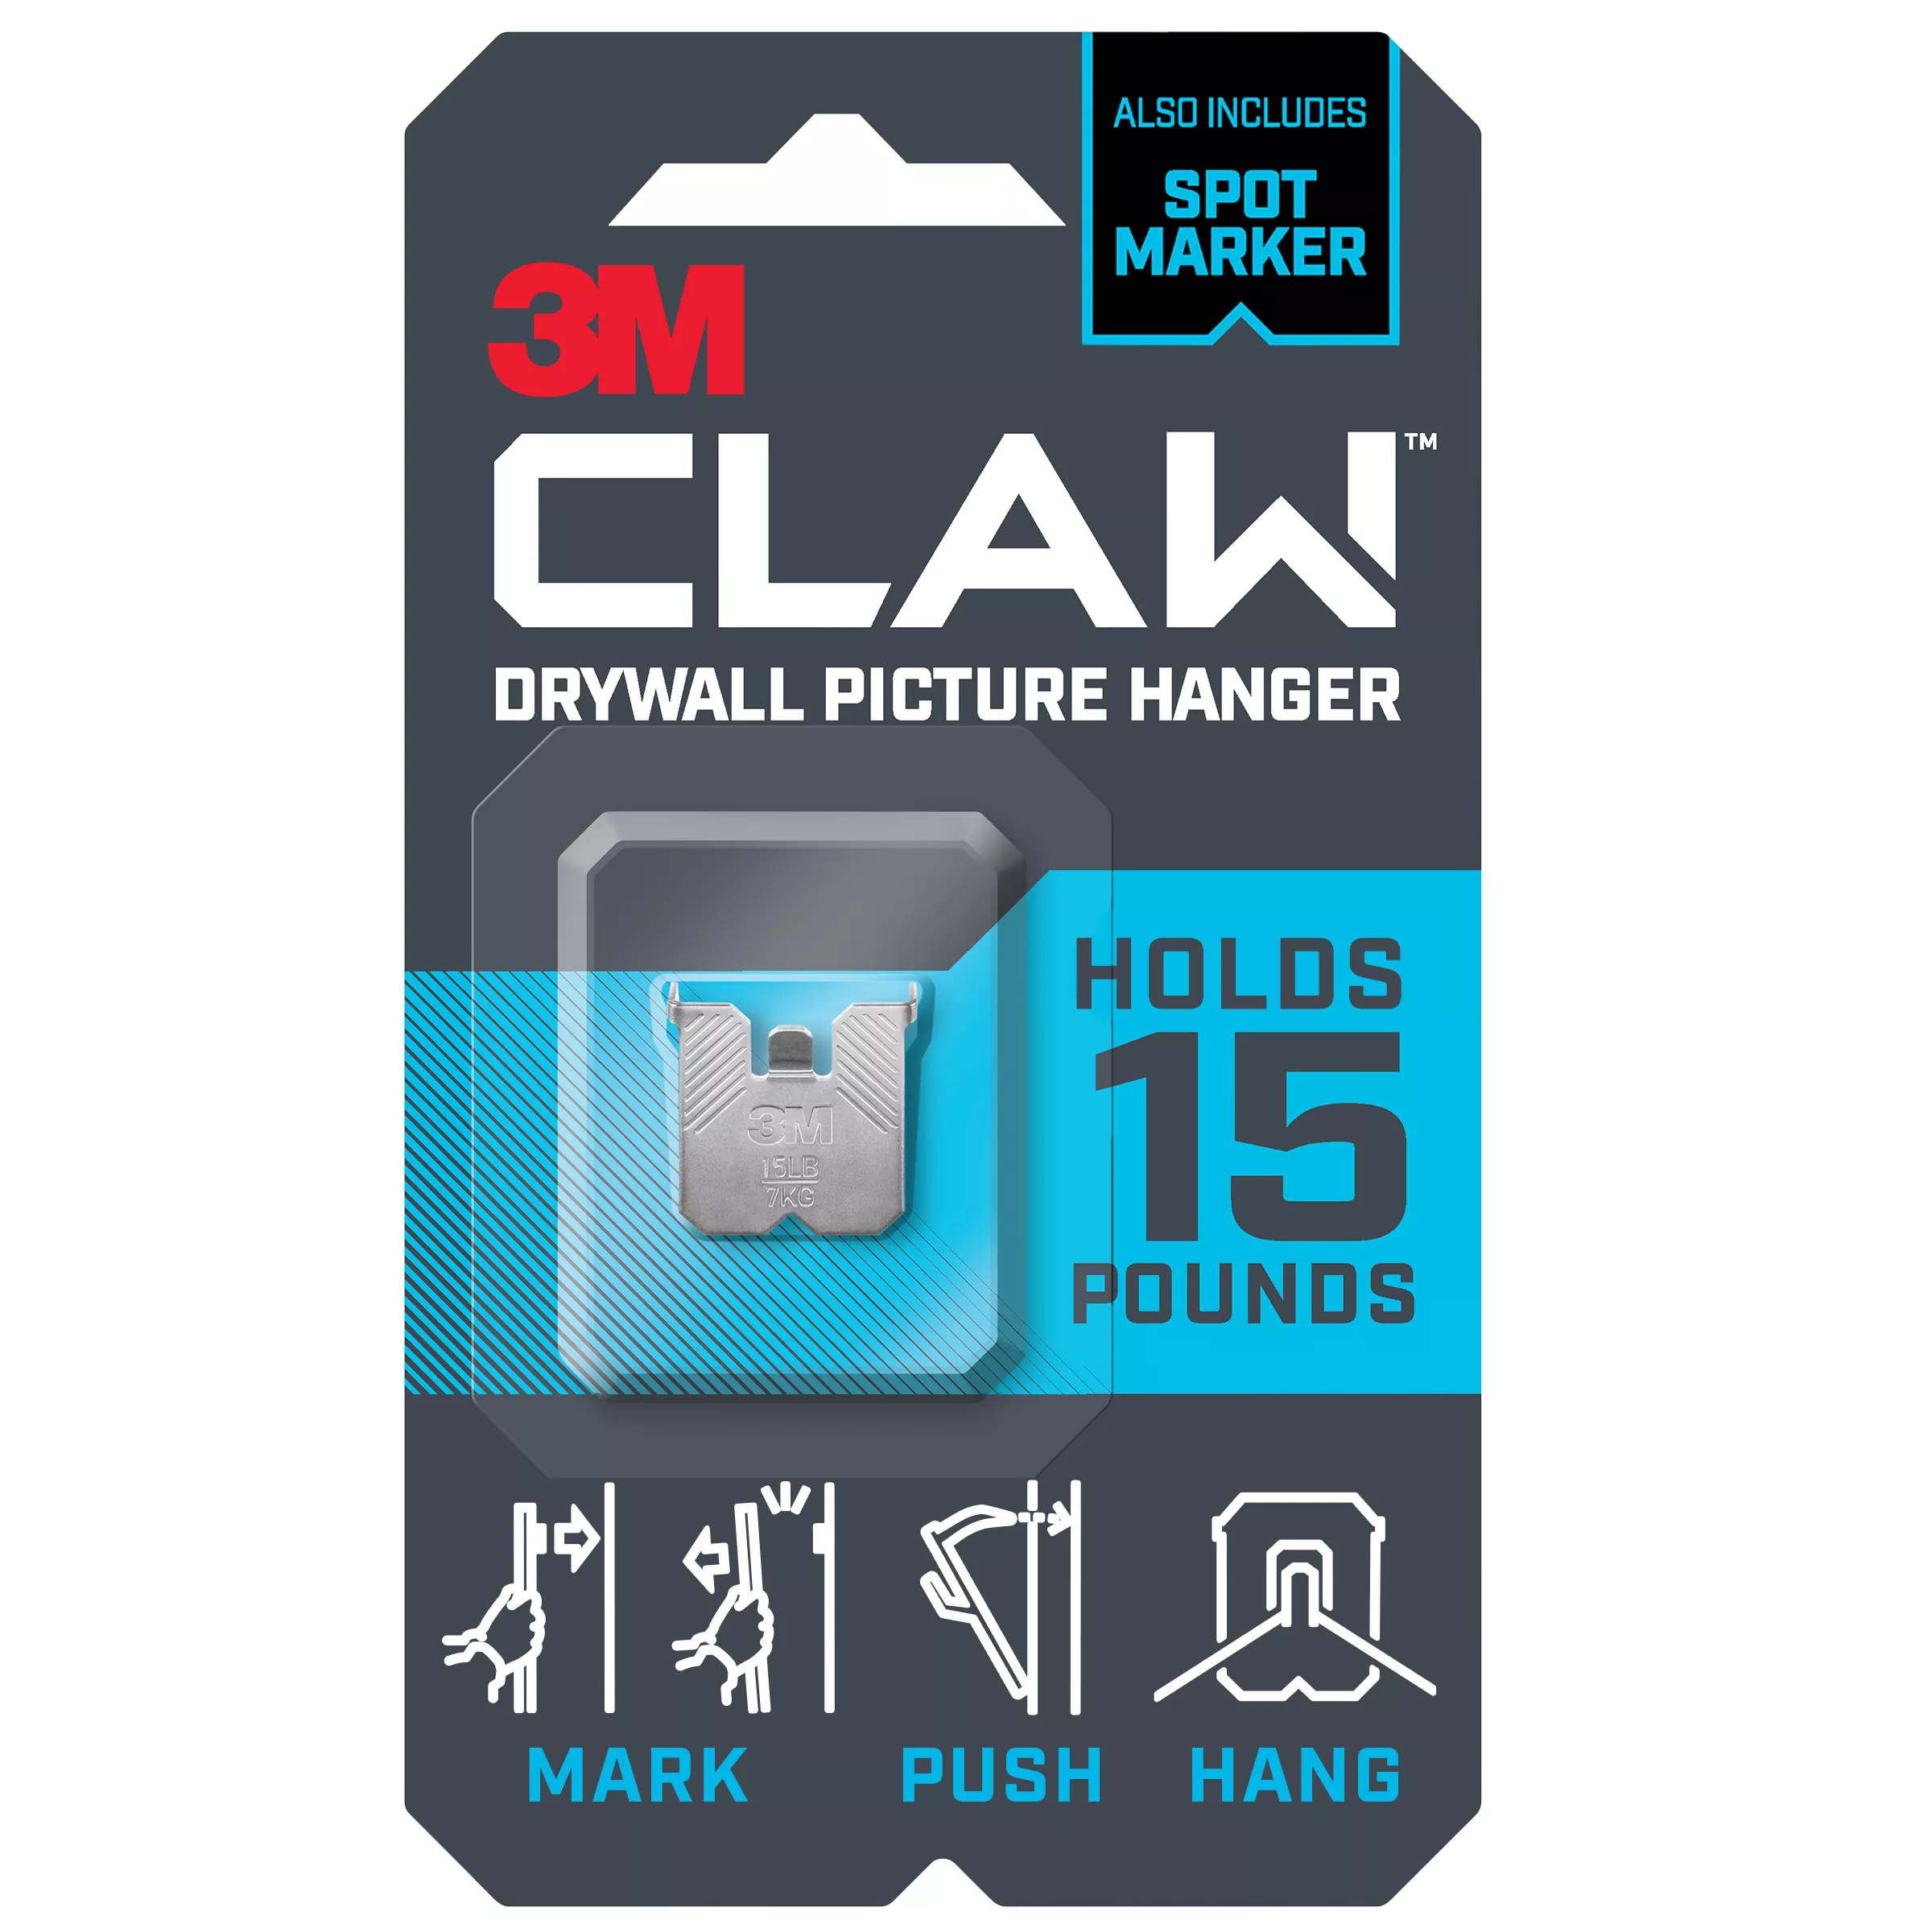 3M CLAW™ Drywall Picture Hanger 15 lb with Temporary Spot Marker 3PH15M-1ES, 1 hanger, 1 marker